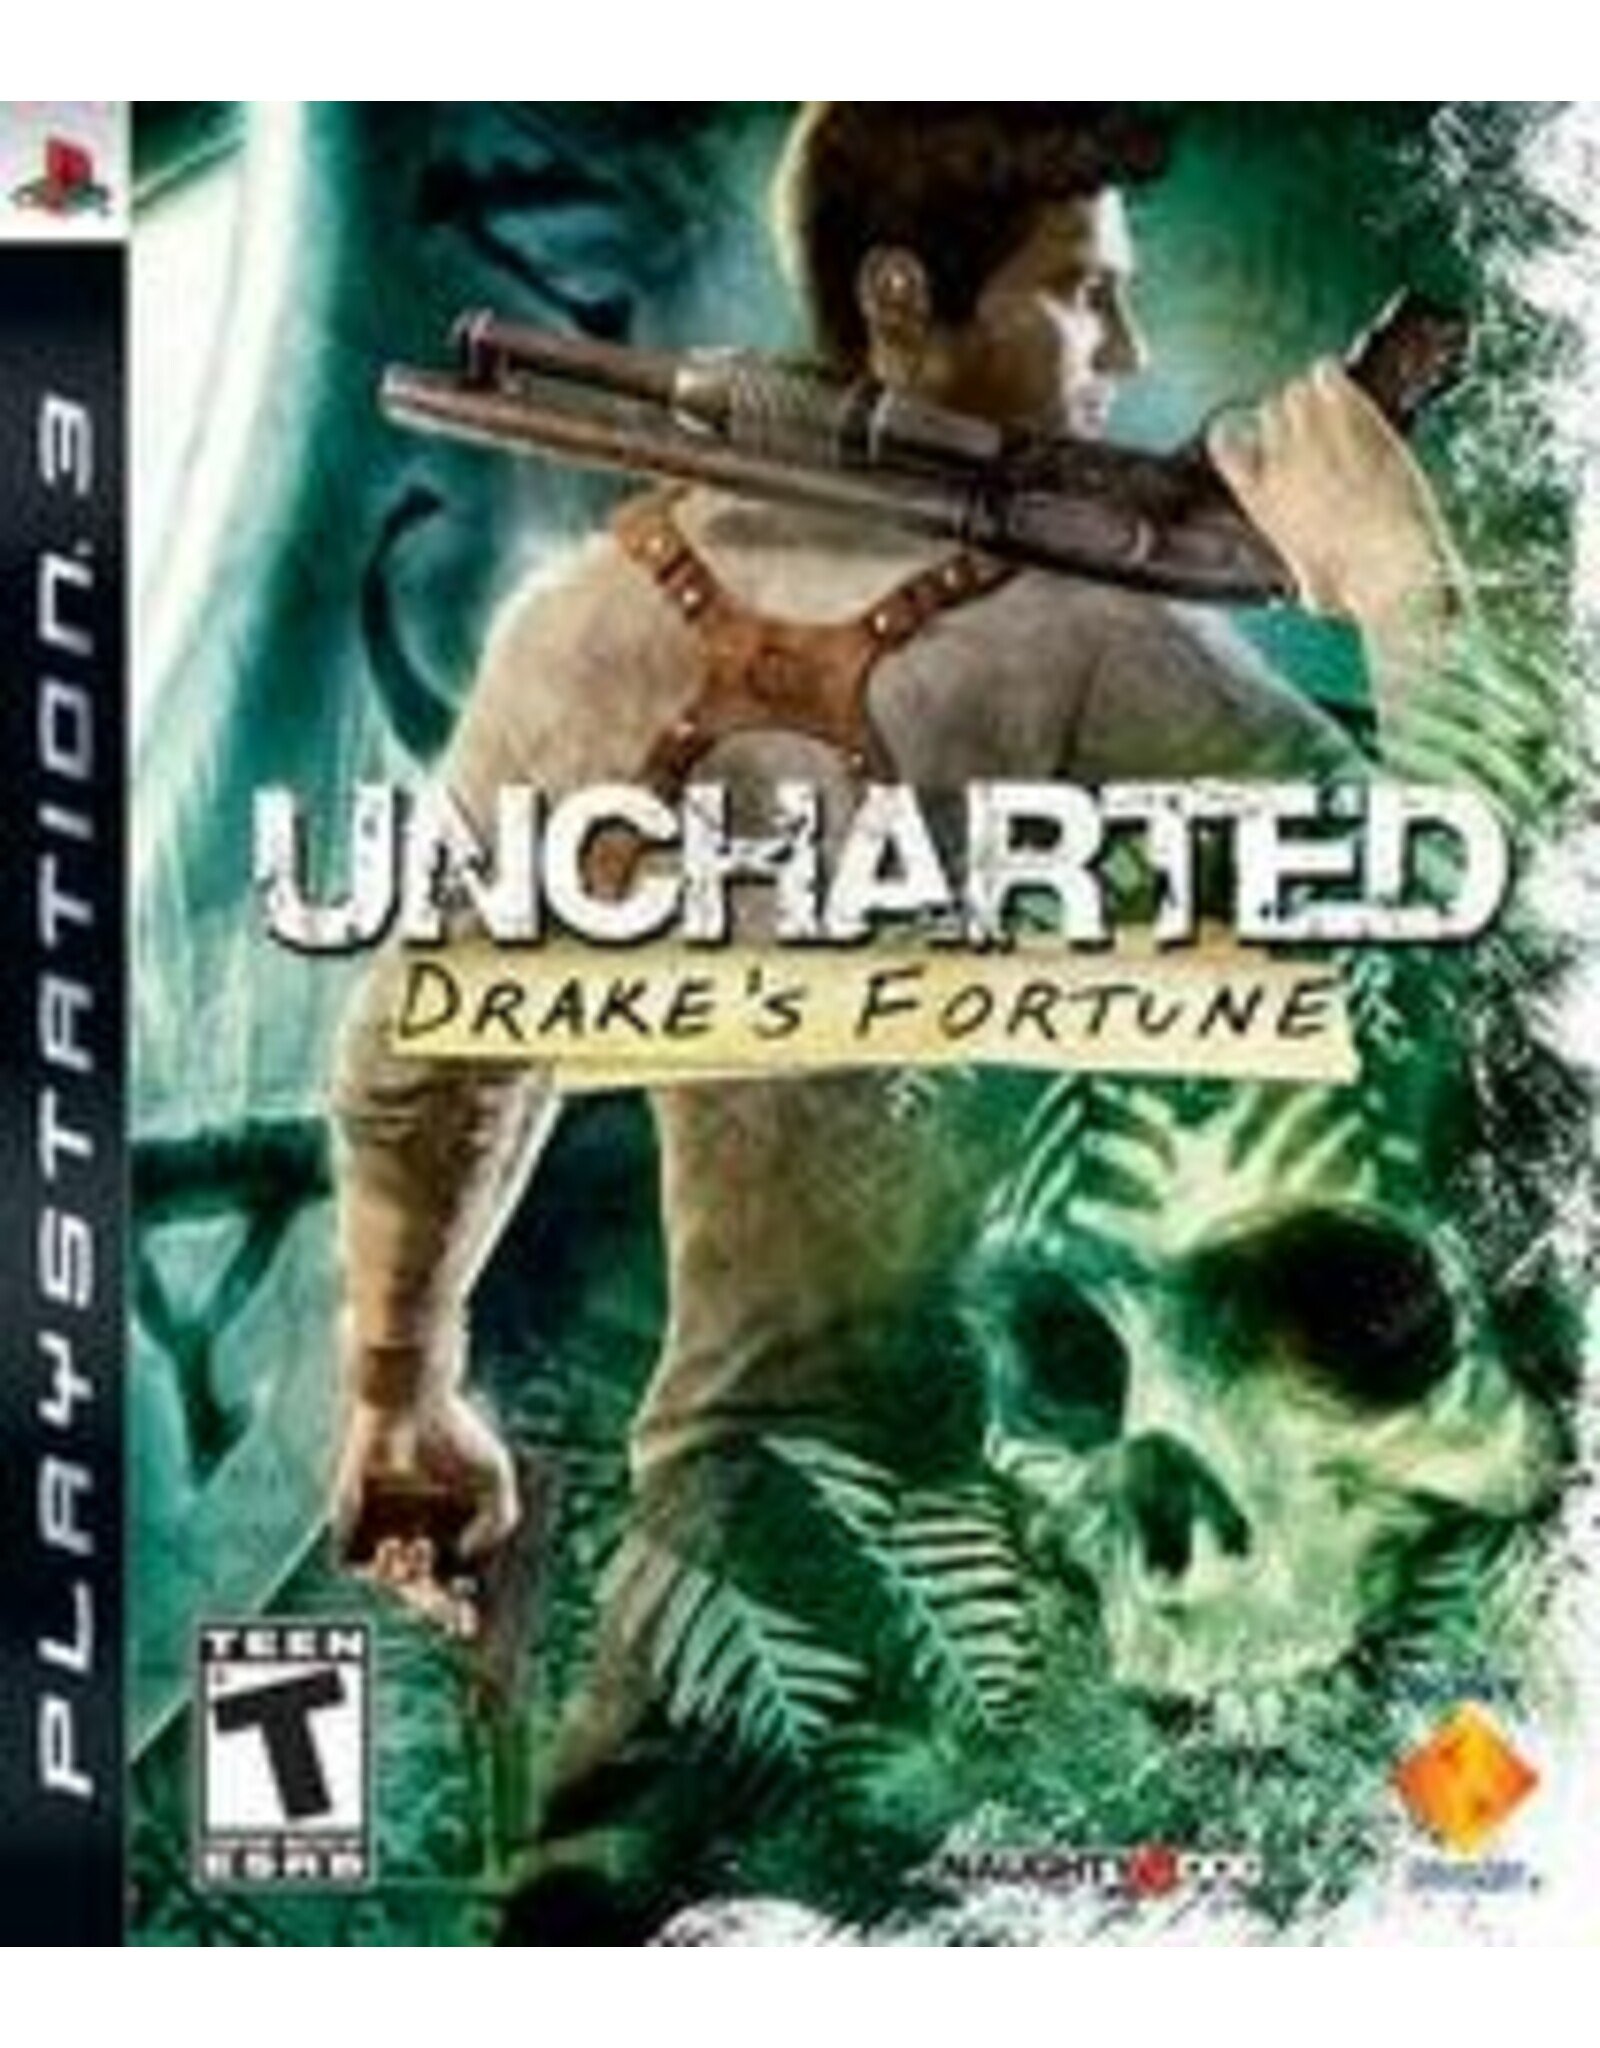 Playstation 3 Uncharted Drake's Fortune (Brand New!)